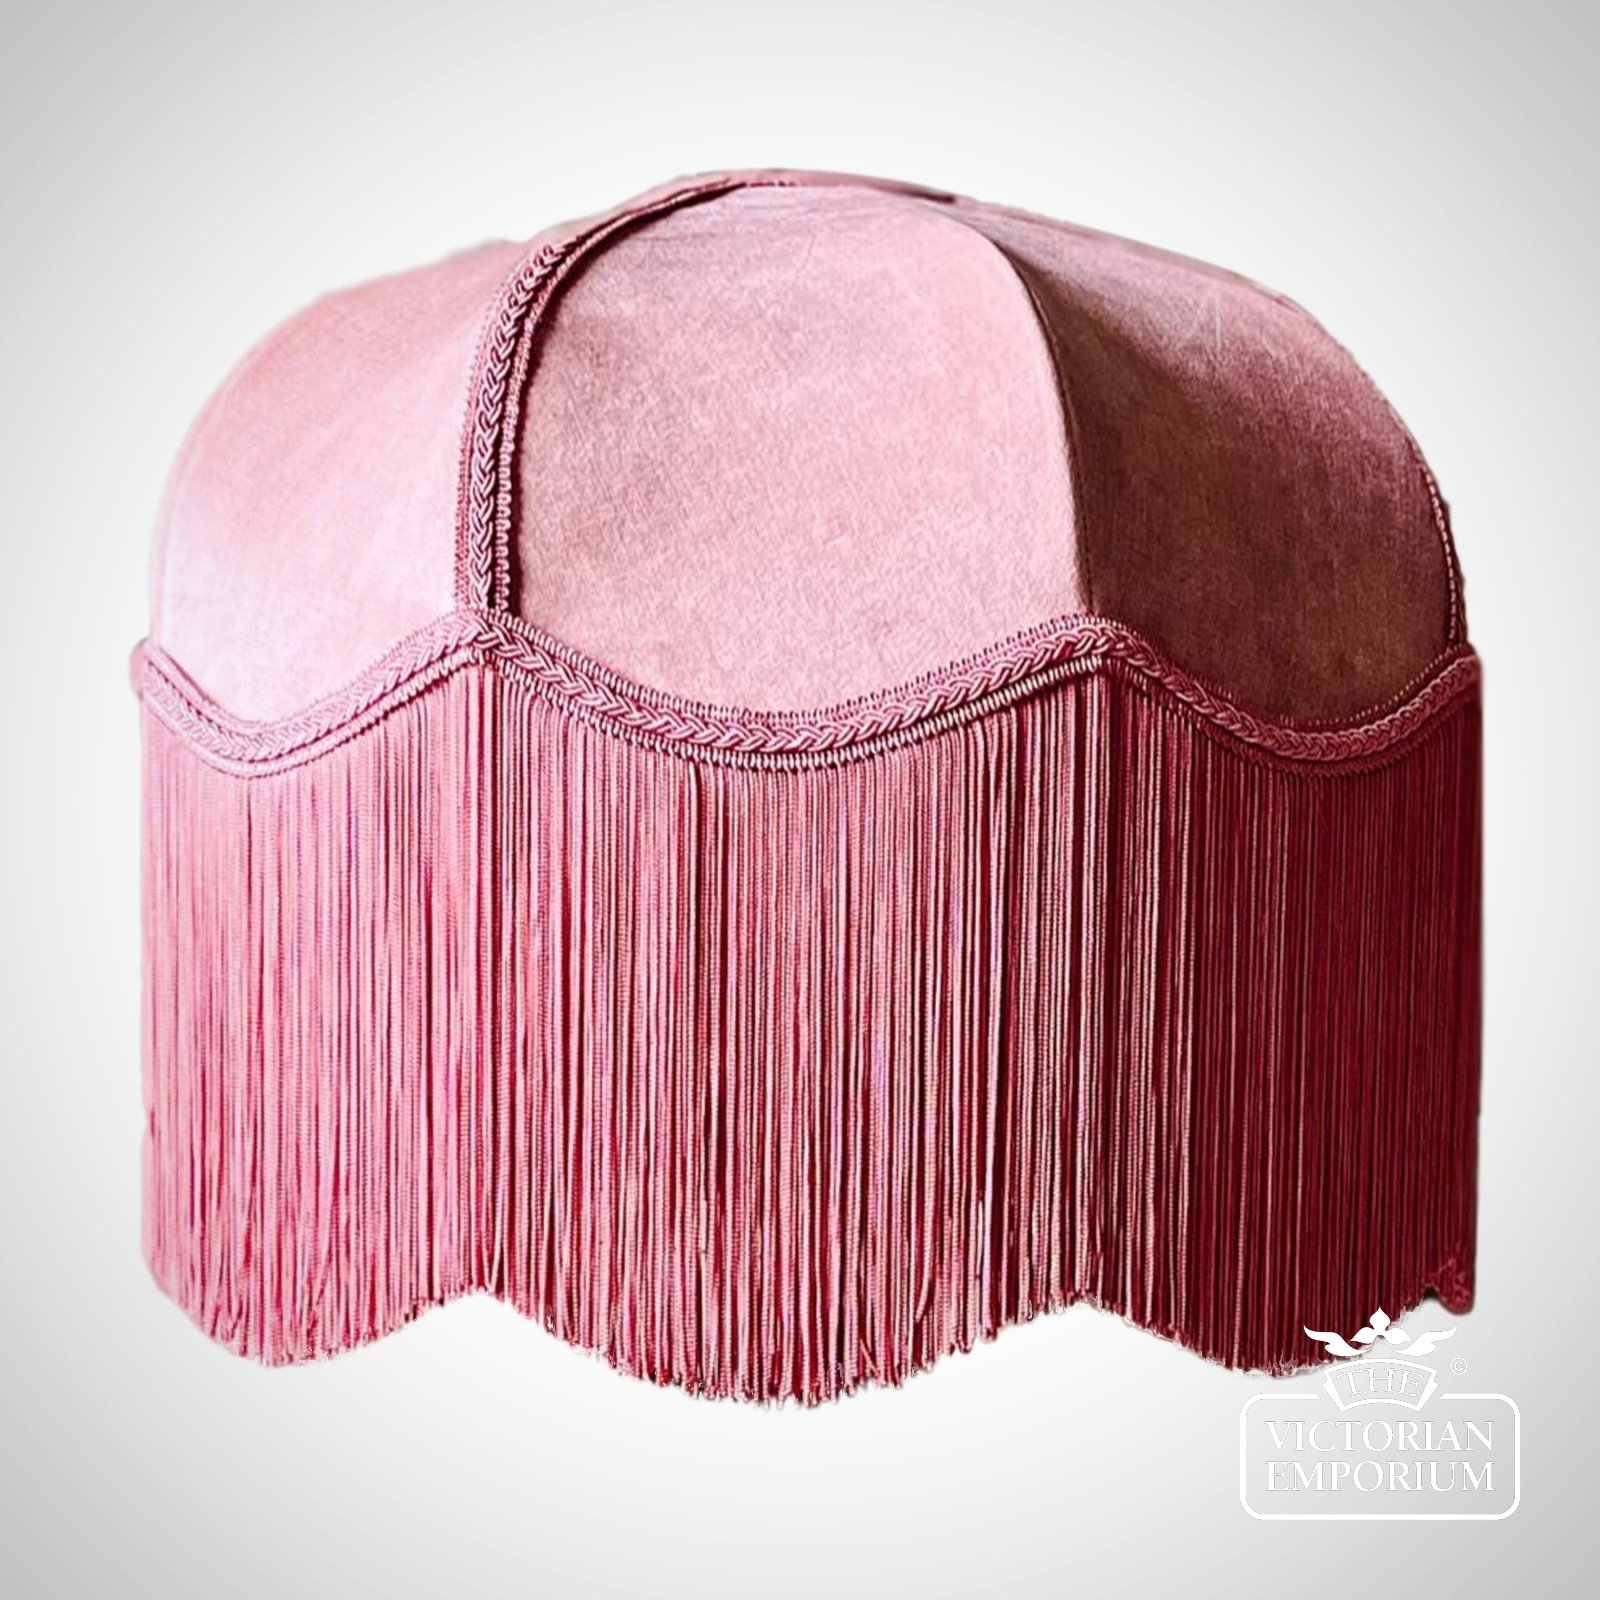 Lotte Deluxe Art Deco Decorative Fringed Lamp Shade in a Choice of Sizes